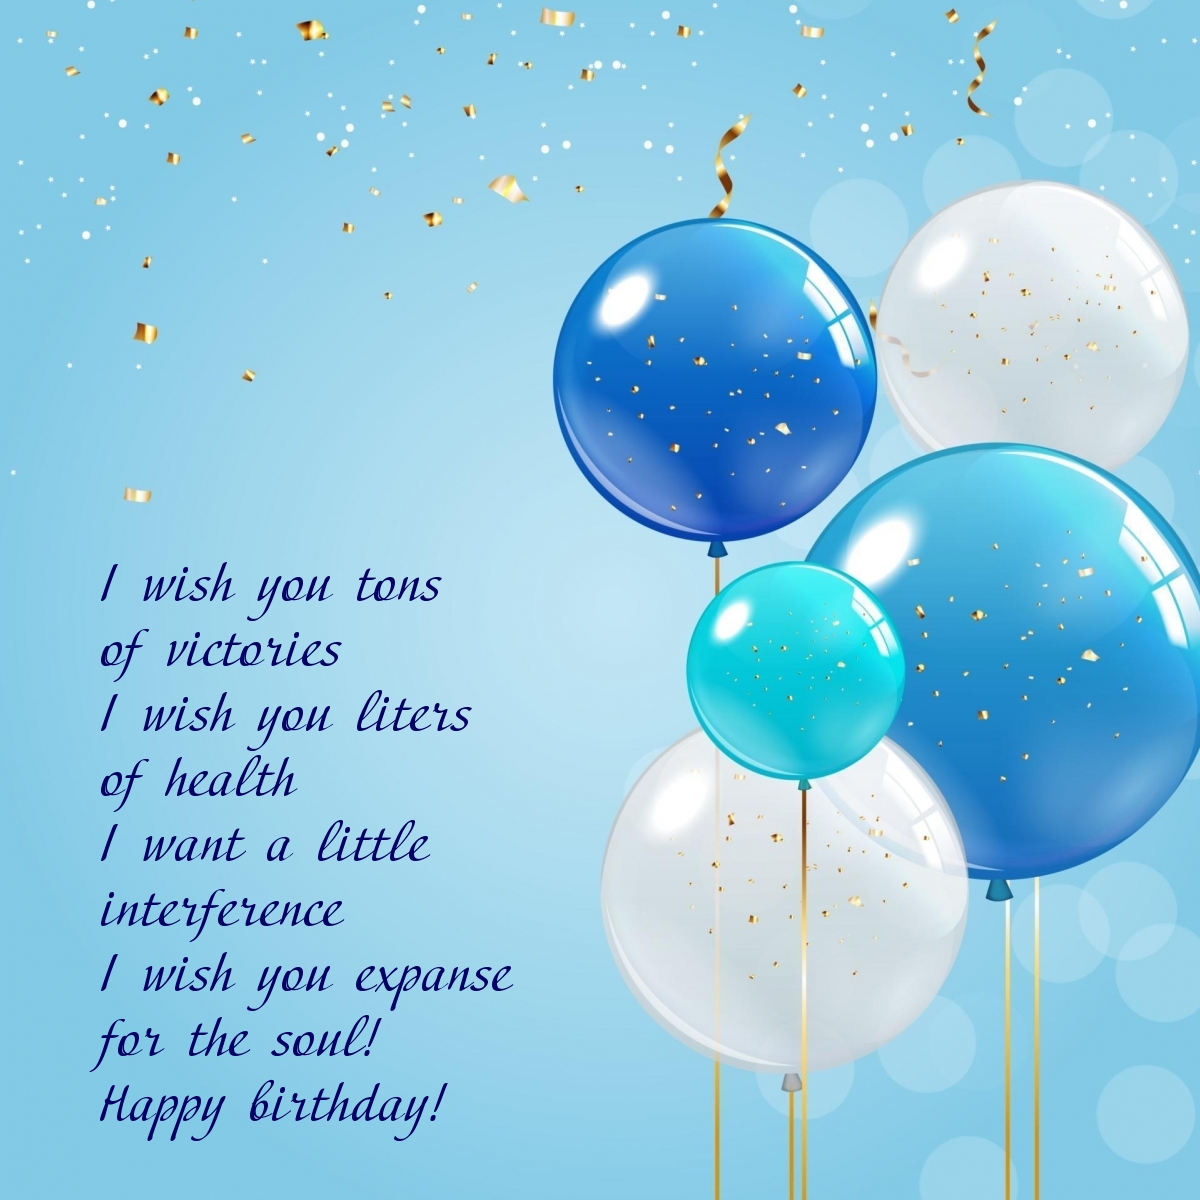 I wish you expanse for the soul! Happy birthday!.